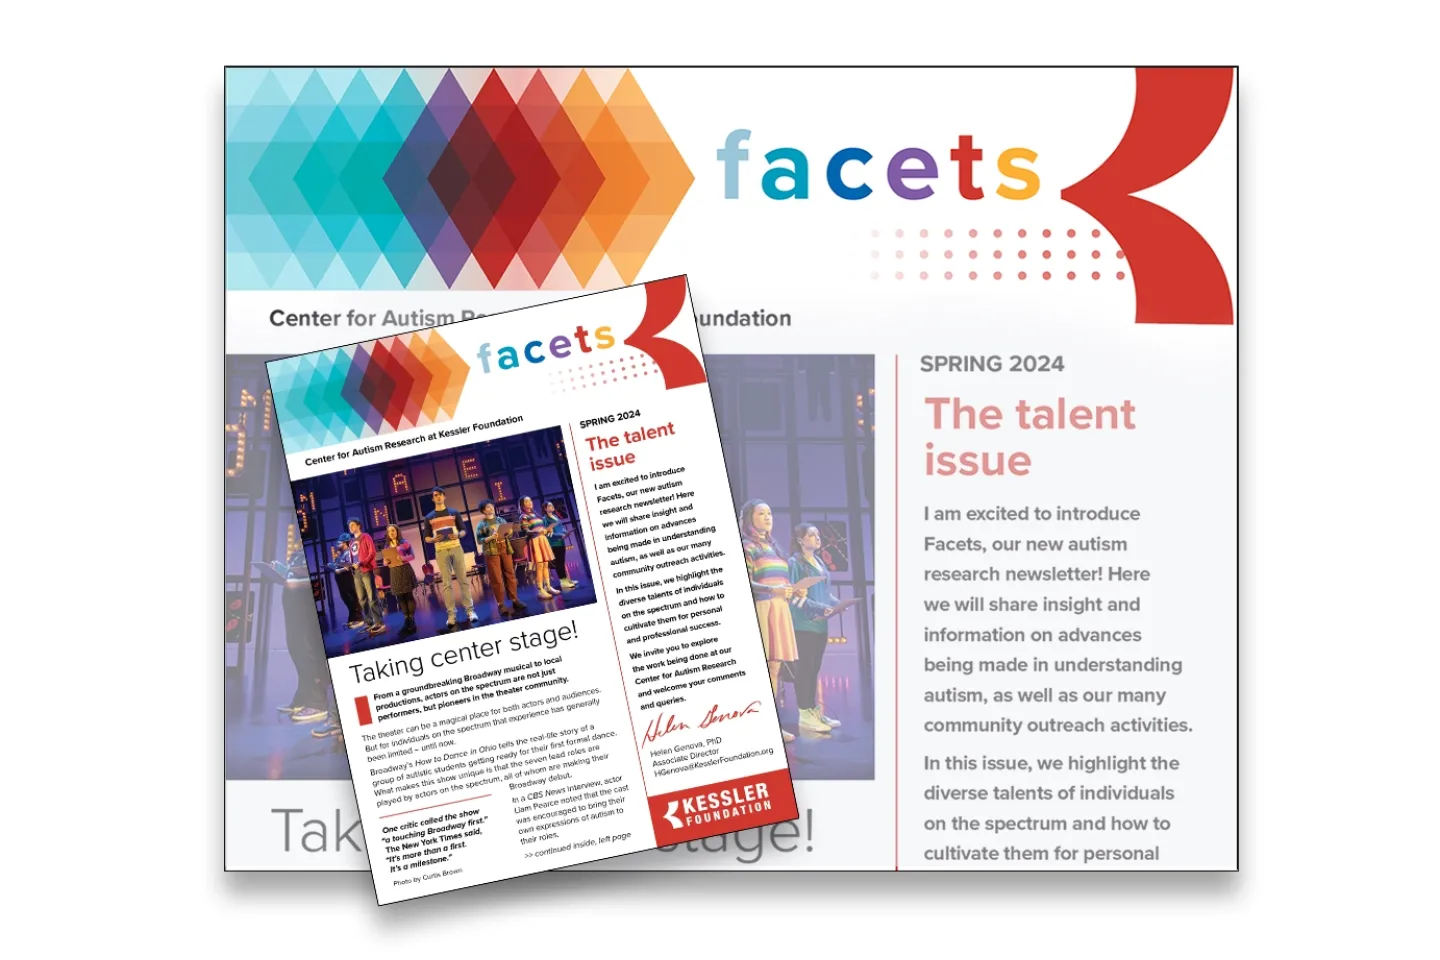 Illustration shows thumbnail of redesigned autism newsletters facets from Kessler Foundation.